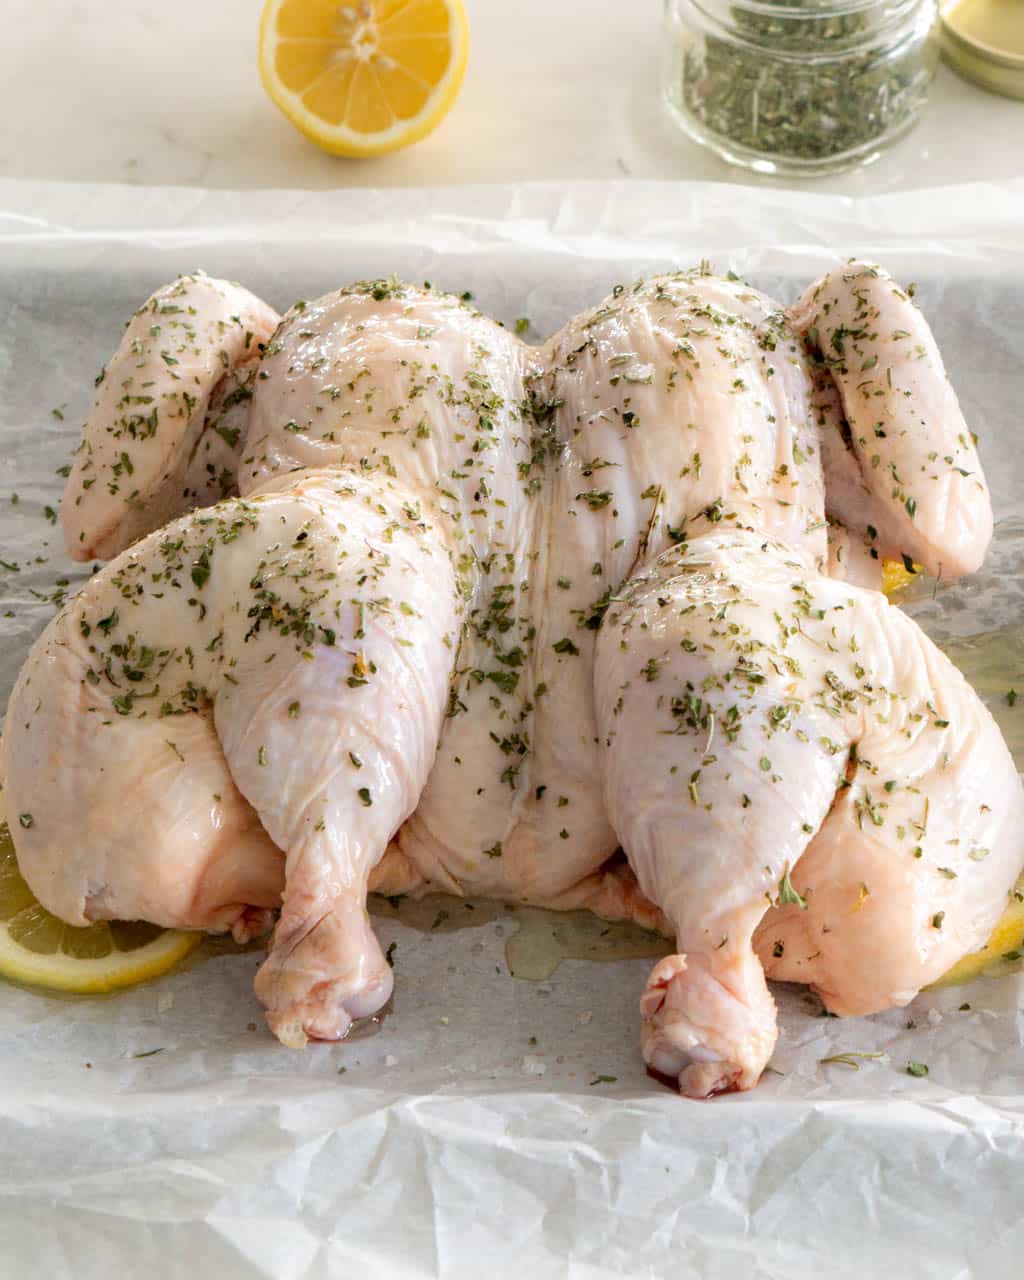 Uncooked Chicken with herbs